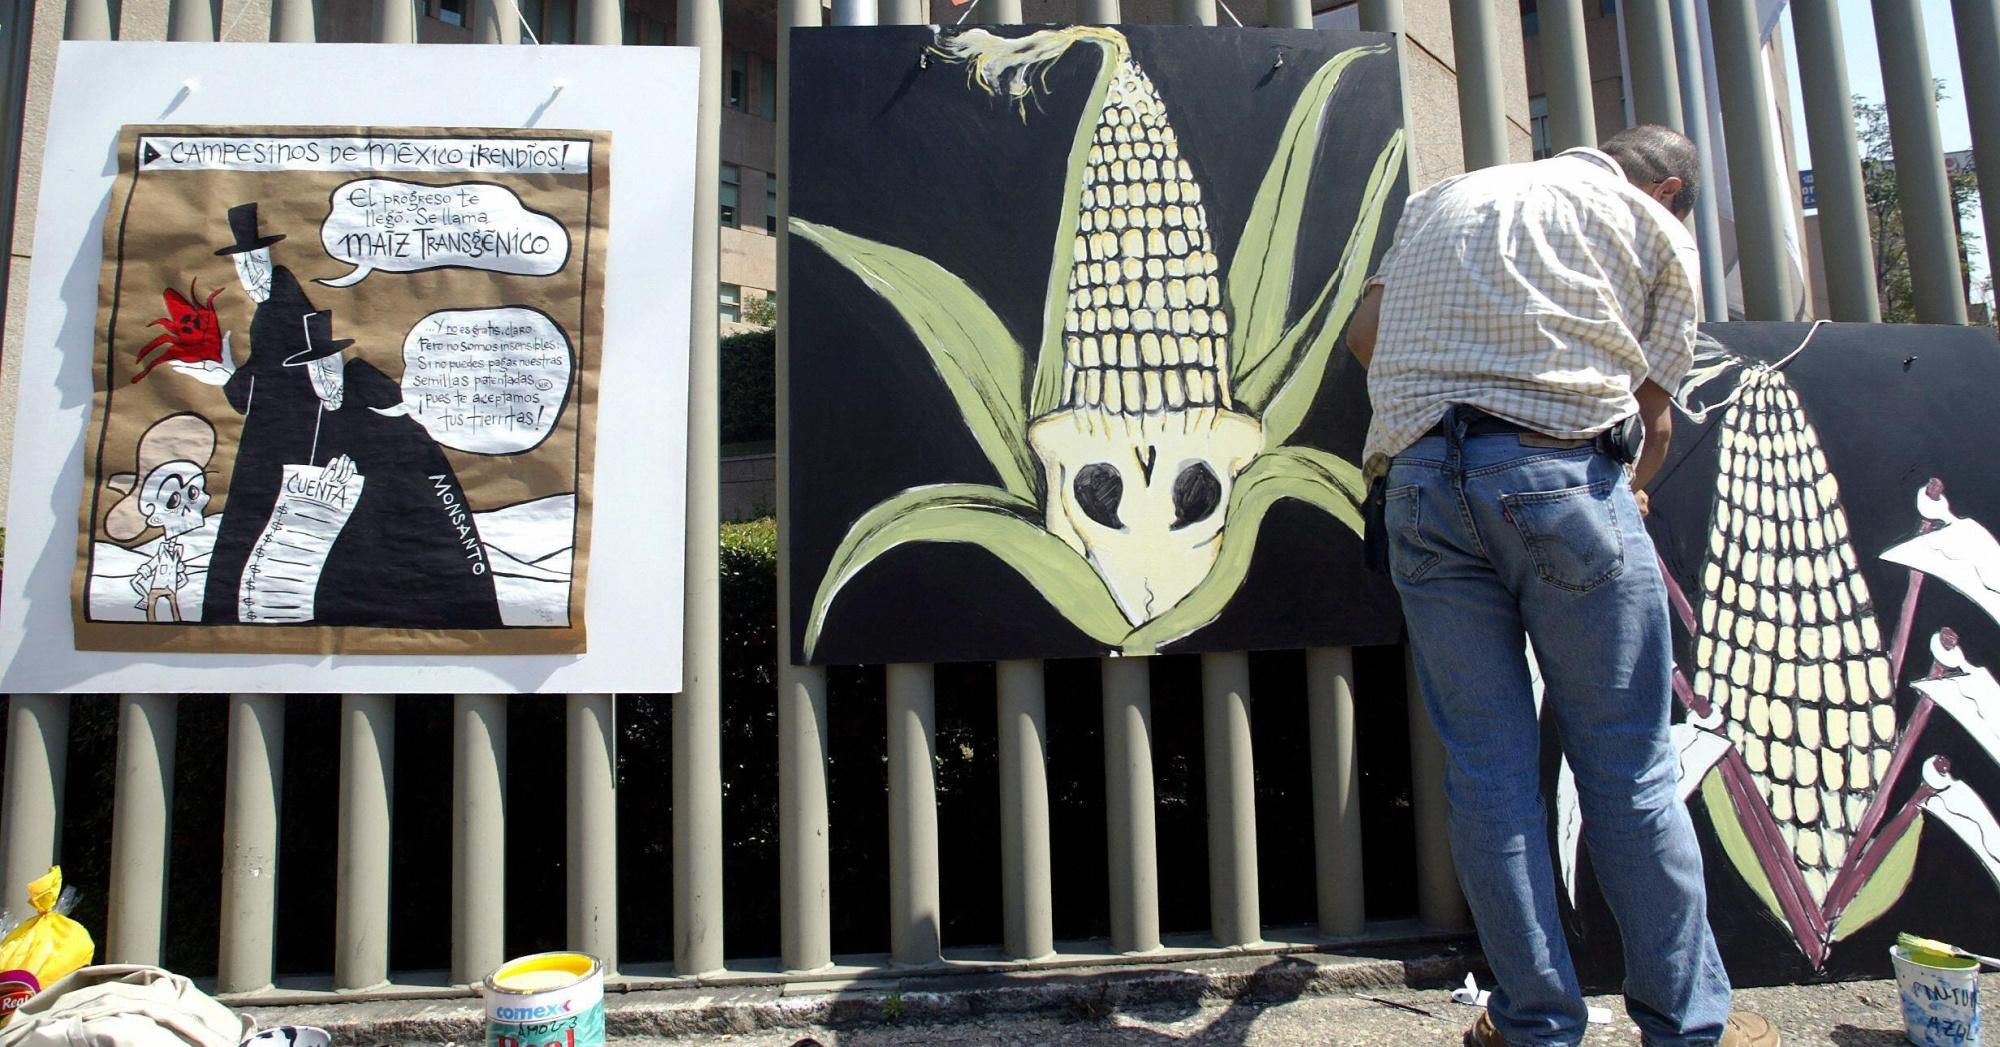 An activist from the environmental group Greenpeace participates in a protest against the use of transgenic corn on November 8, 2004, in Mexico City. (Photo: Juan Barreto/AFP via Getty Images) 